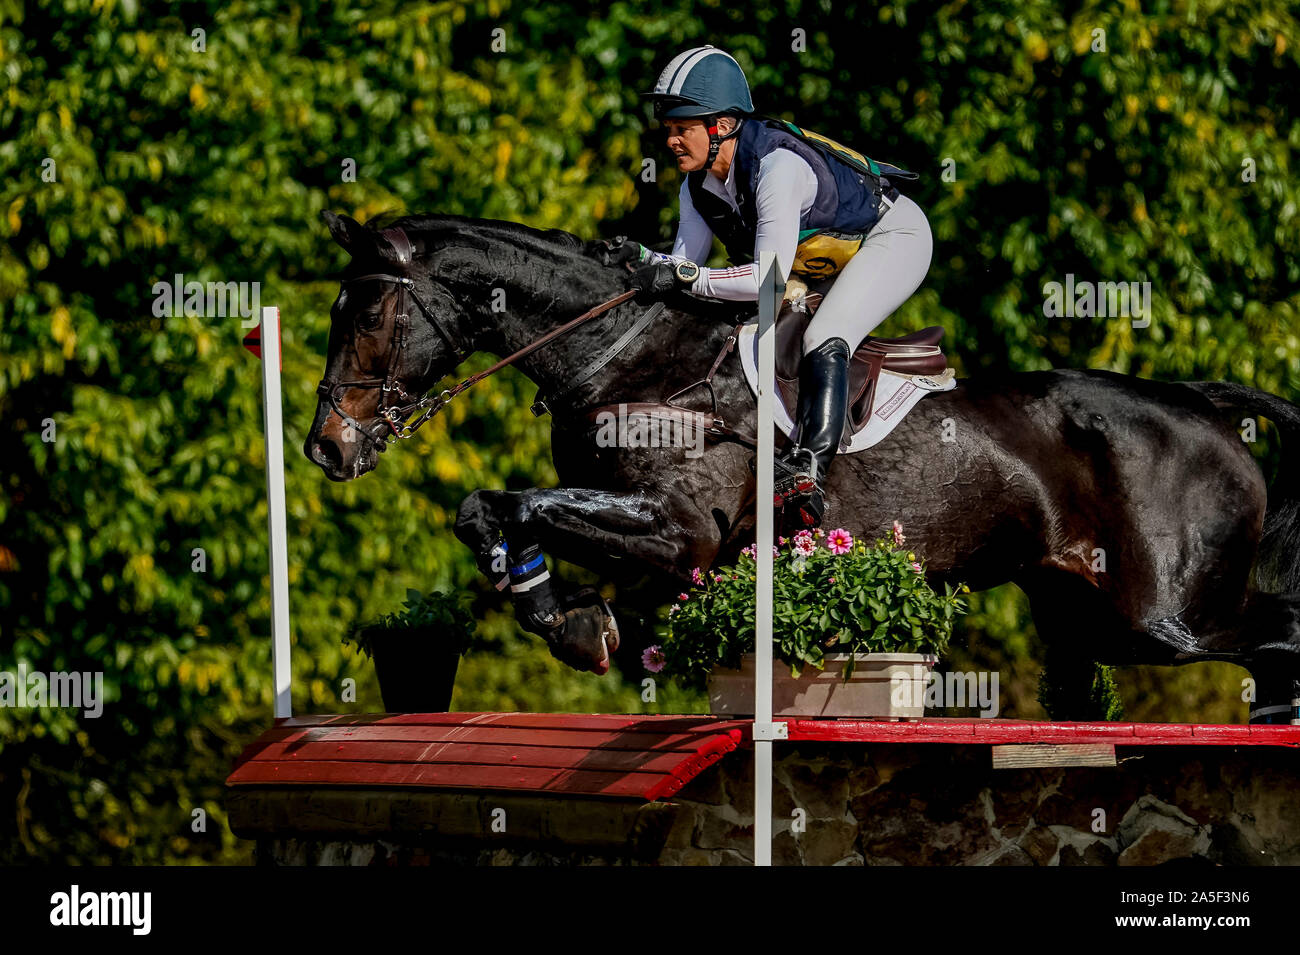 October 19, 2019, Fair Hill, MD, USA: October 20, 2019 : Lynn Symansky (USA) Under Suspection clear an obstacle during the 4* Cross Country Test at the Fair Hill International 3-Day Event at the Fair Hill Natural Resources Area in Fair Hill, Maryland. This is the final year of a 31-year run of the event at this location. In 2020, the event moves to a new facility in the Fair Hill area and will eventually be upgraded to one of two CCI 5* events in the United States. Scott Serio/Eclipse Sportswire/CSM Stock Photo